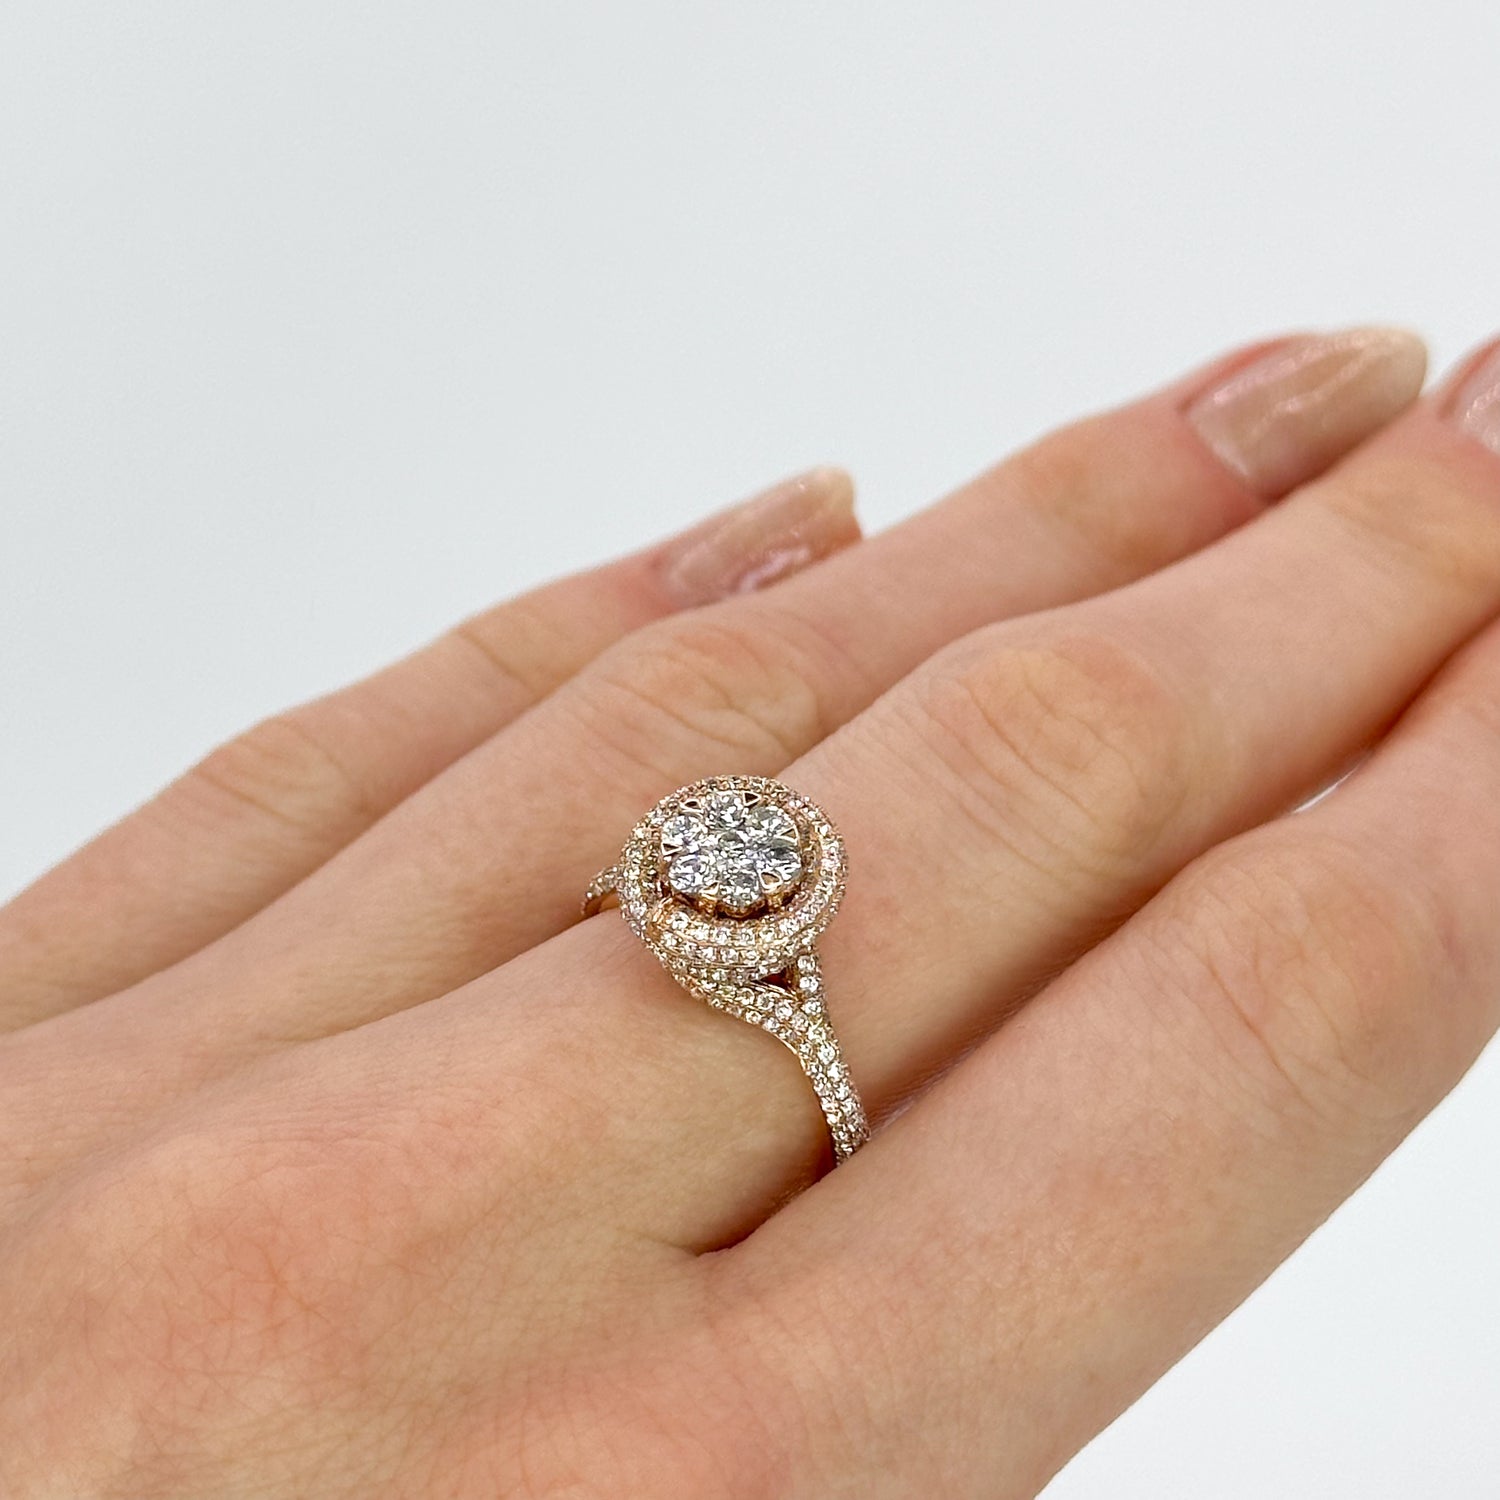 Rose Gold Swirl Ring with 1.00ct of Diamonds